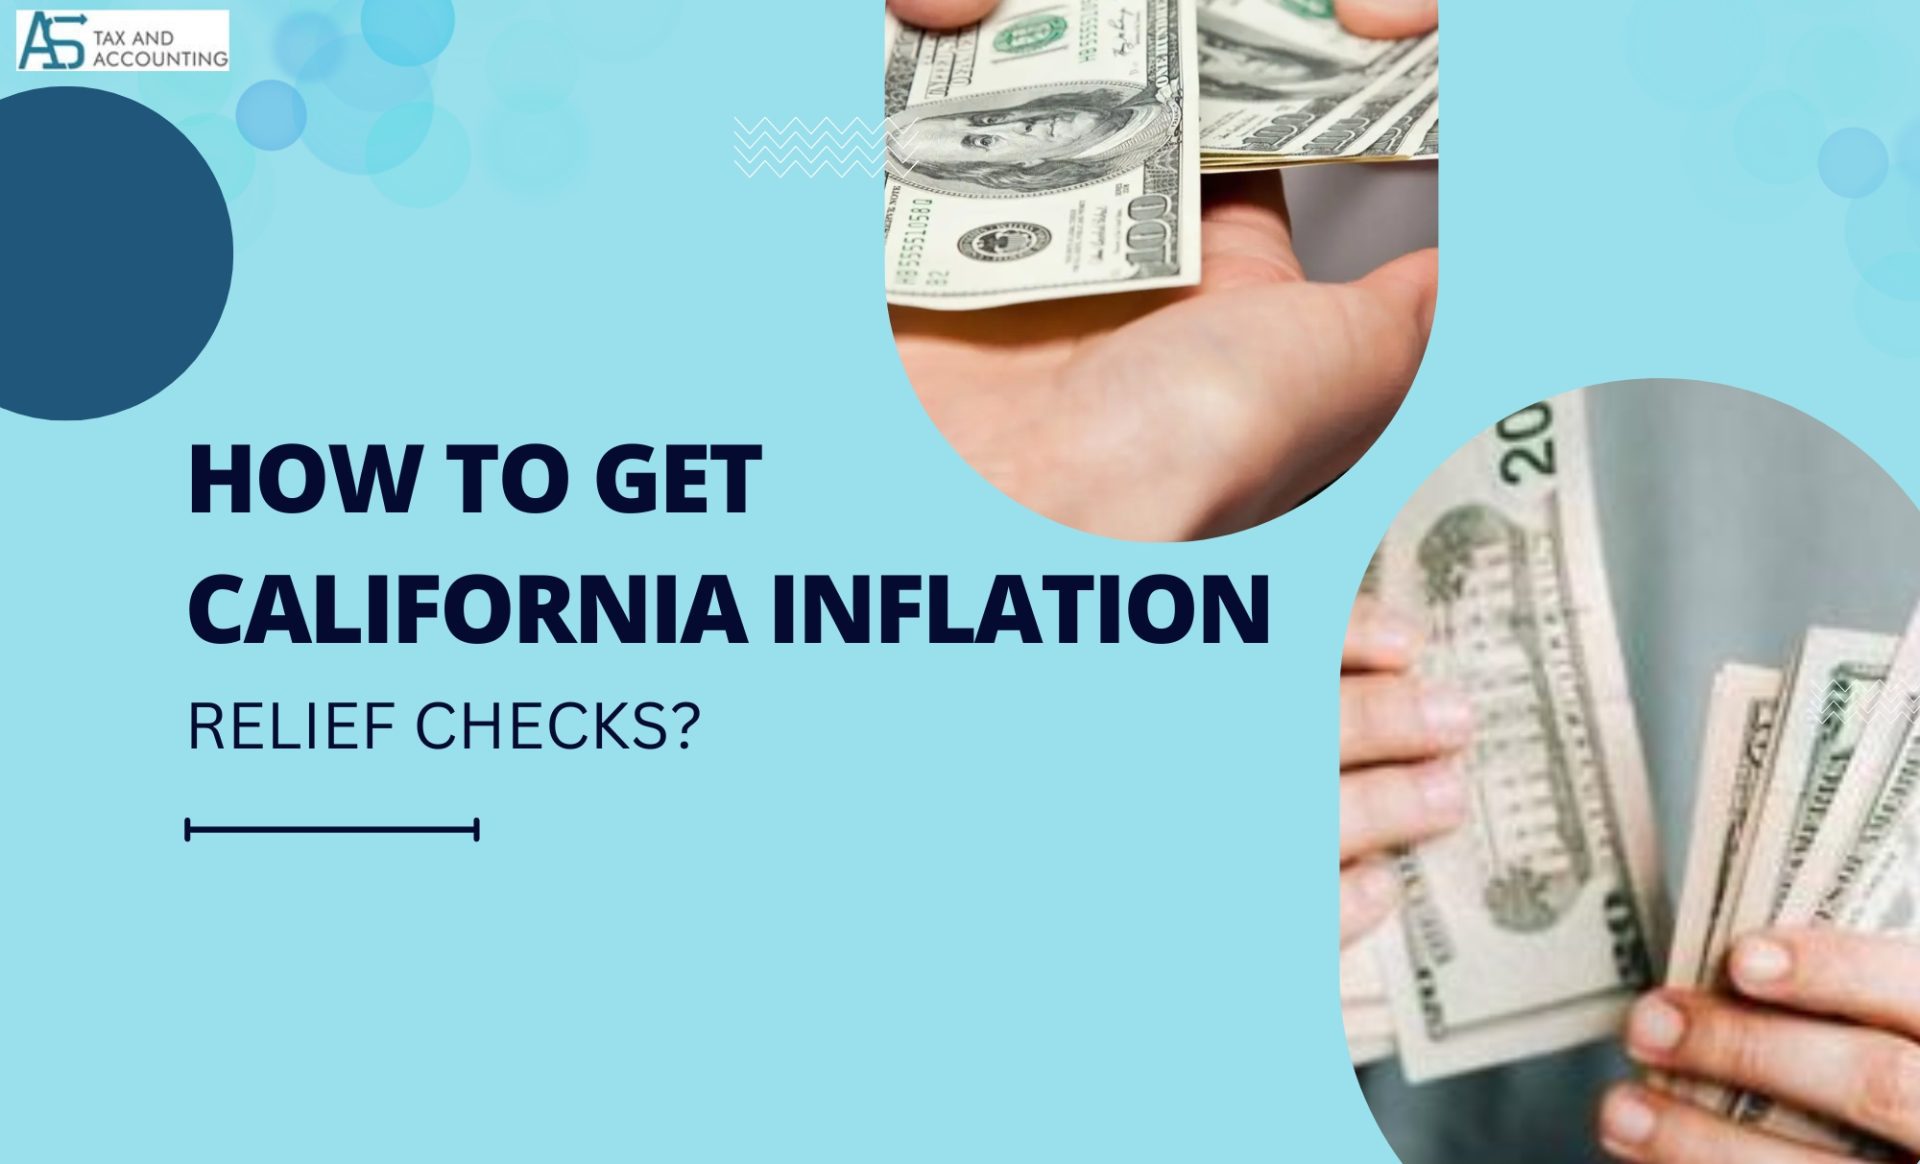 How to get California inflation relief checks? Explained